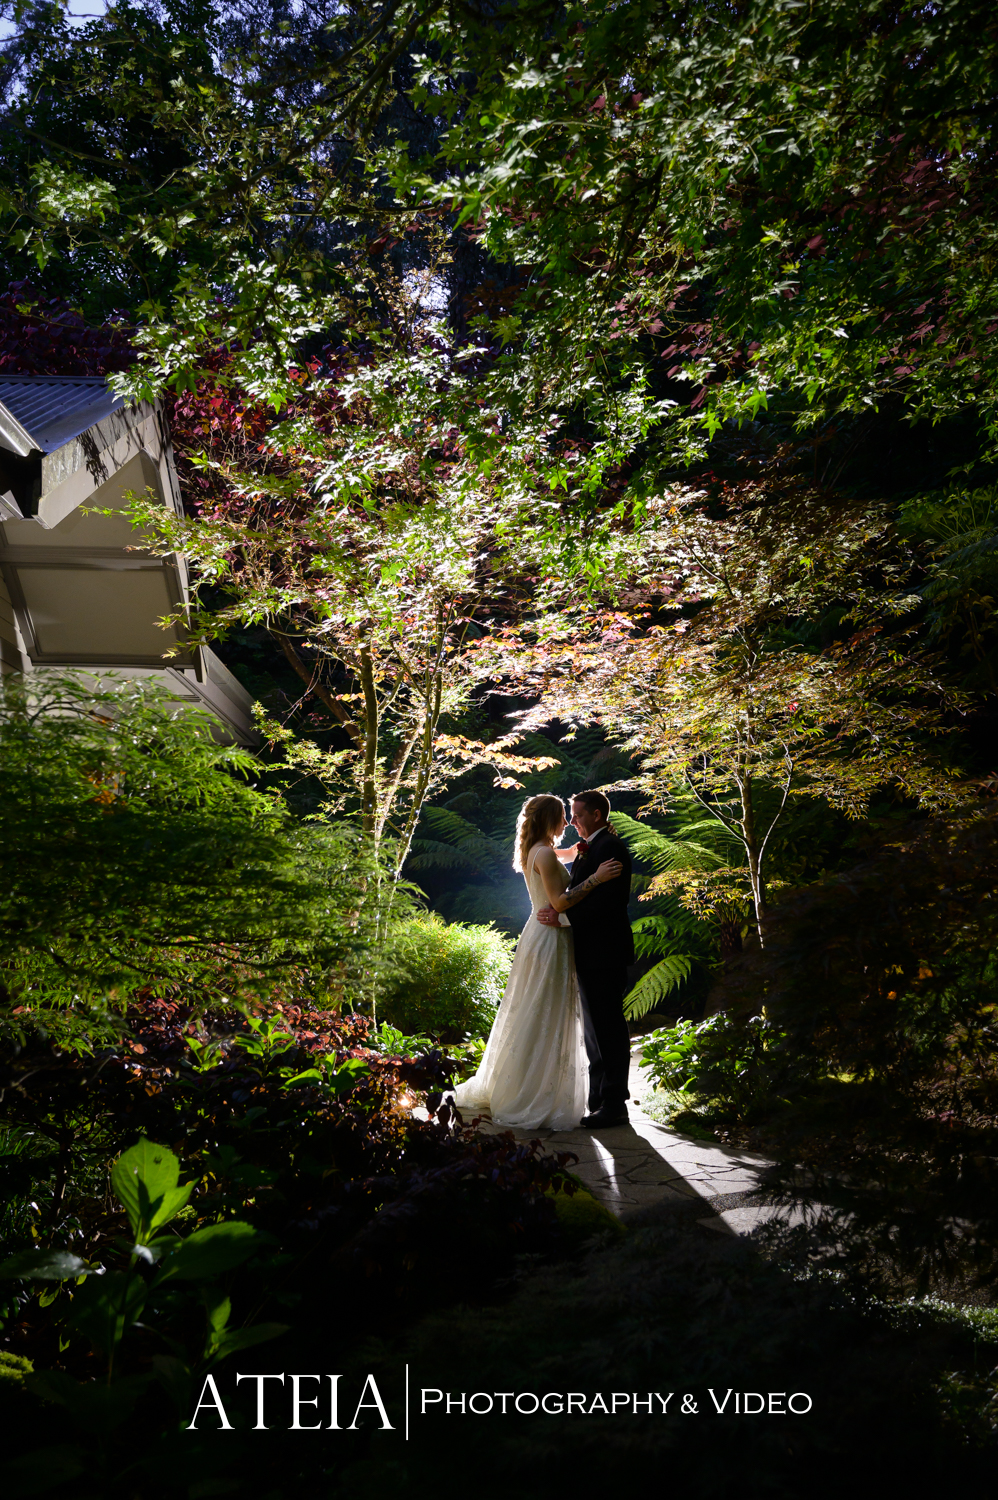 , Amy and David&#8217;s wedding photography at Lyrebird Falls captured by ATEIA Photography &#038; Video